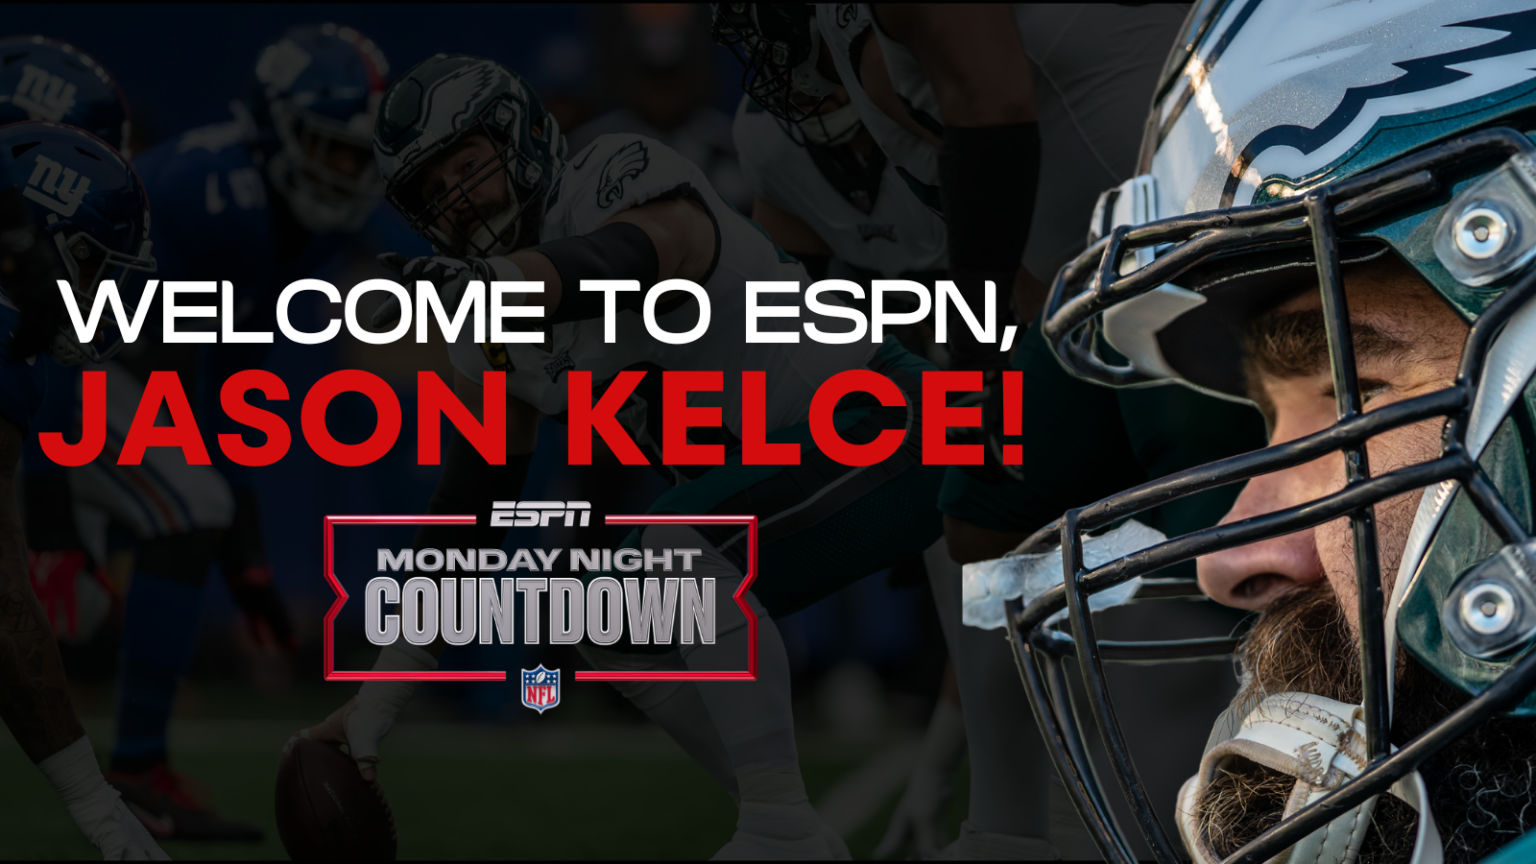 Jason Kelce has officially joined ESPN as the newest member of “Monday Night Countdown,” ESPN announced Tuesday